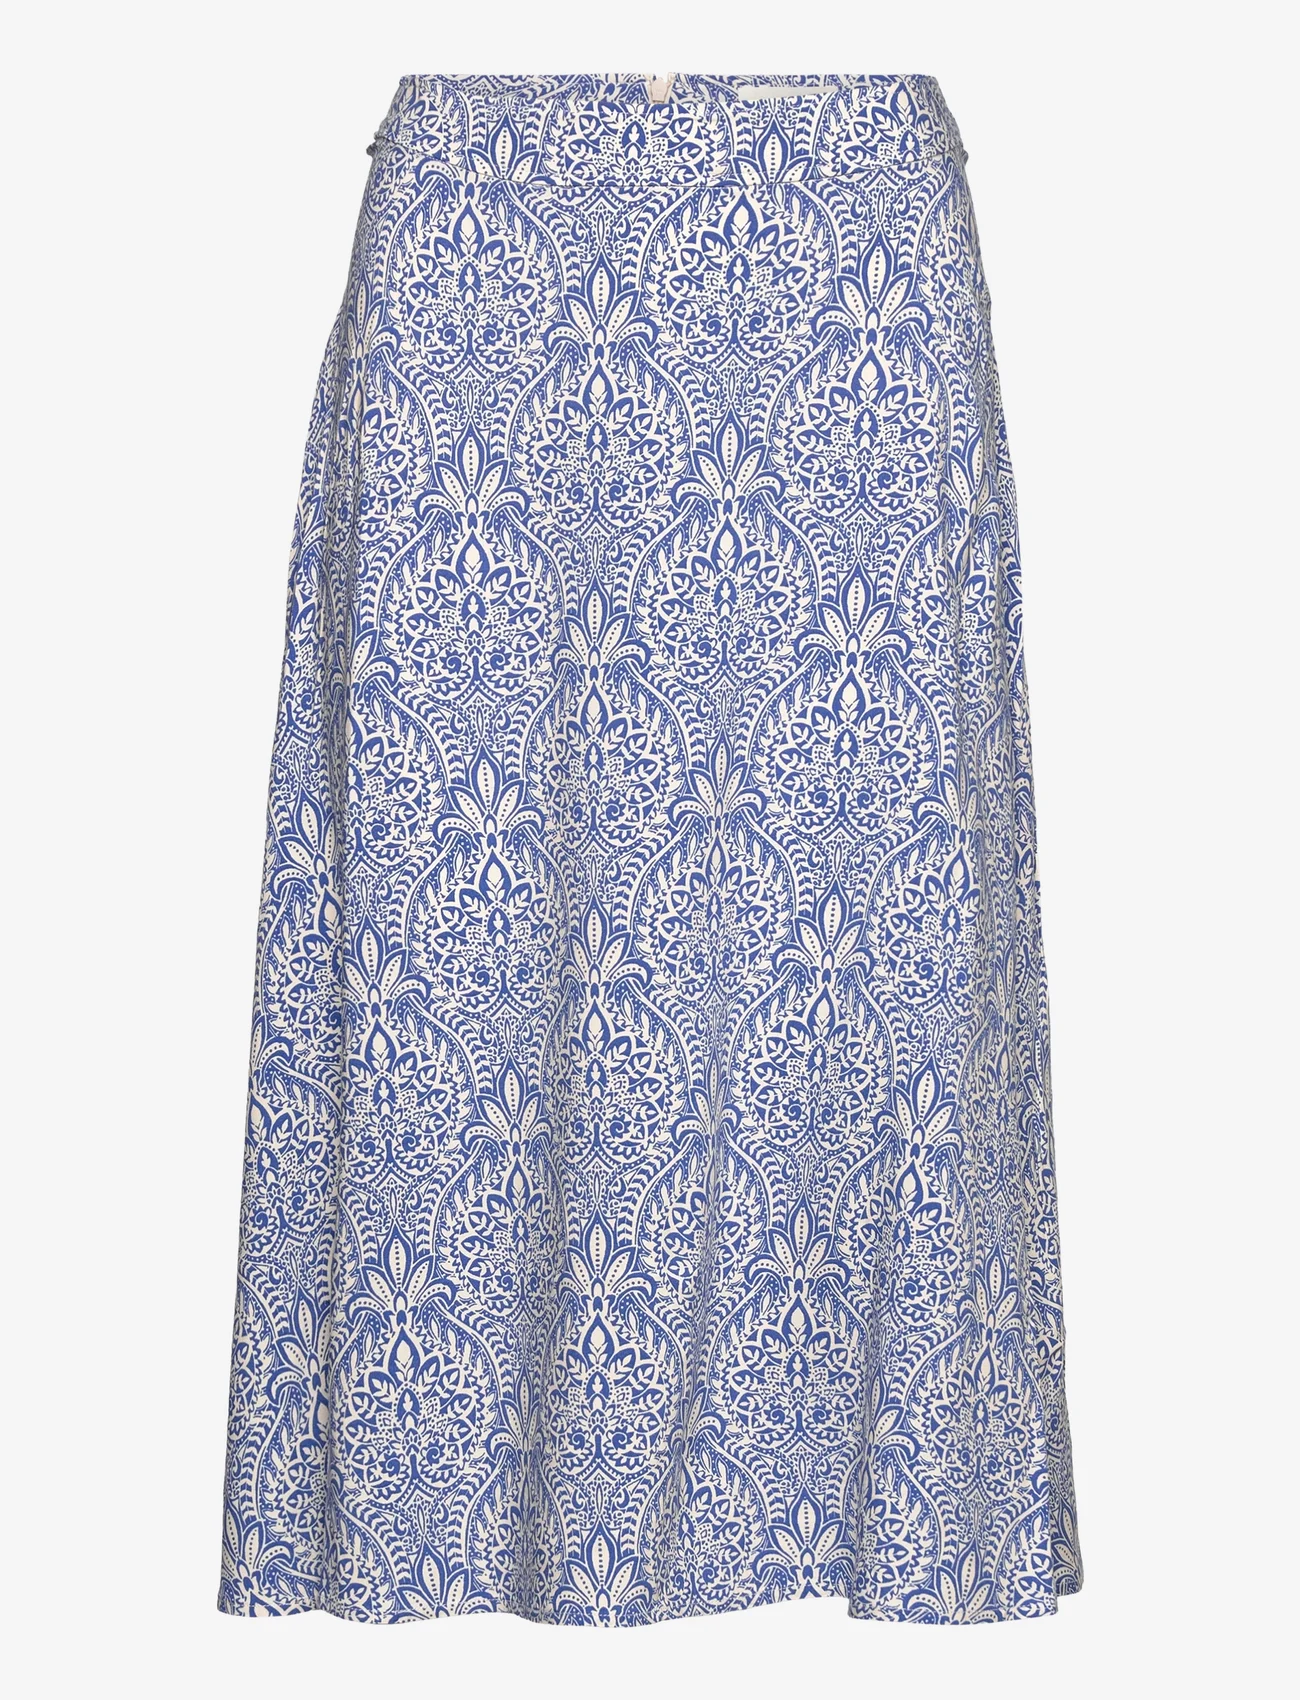 Part Two - OfeliePW SK - midi skirts - beaucoup blue ornament print - 0